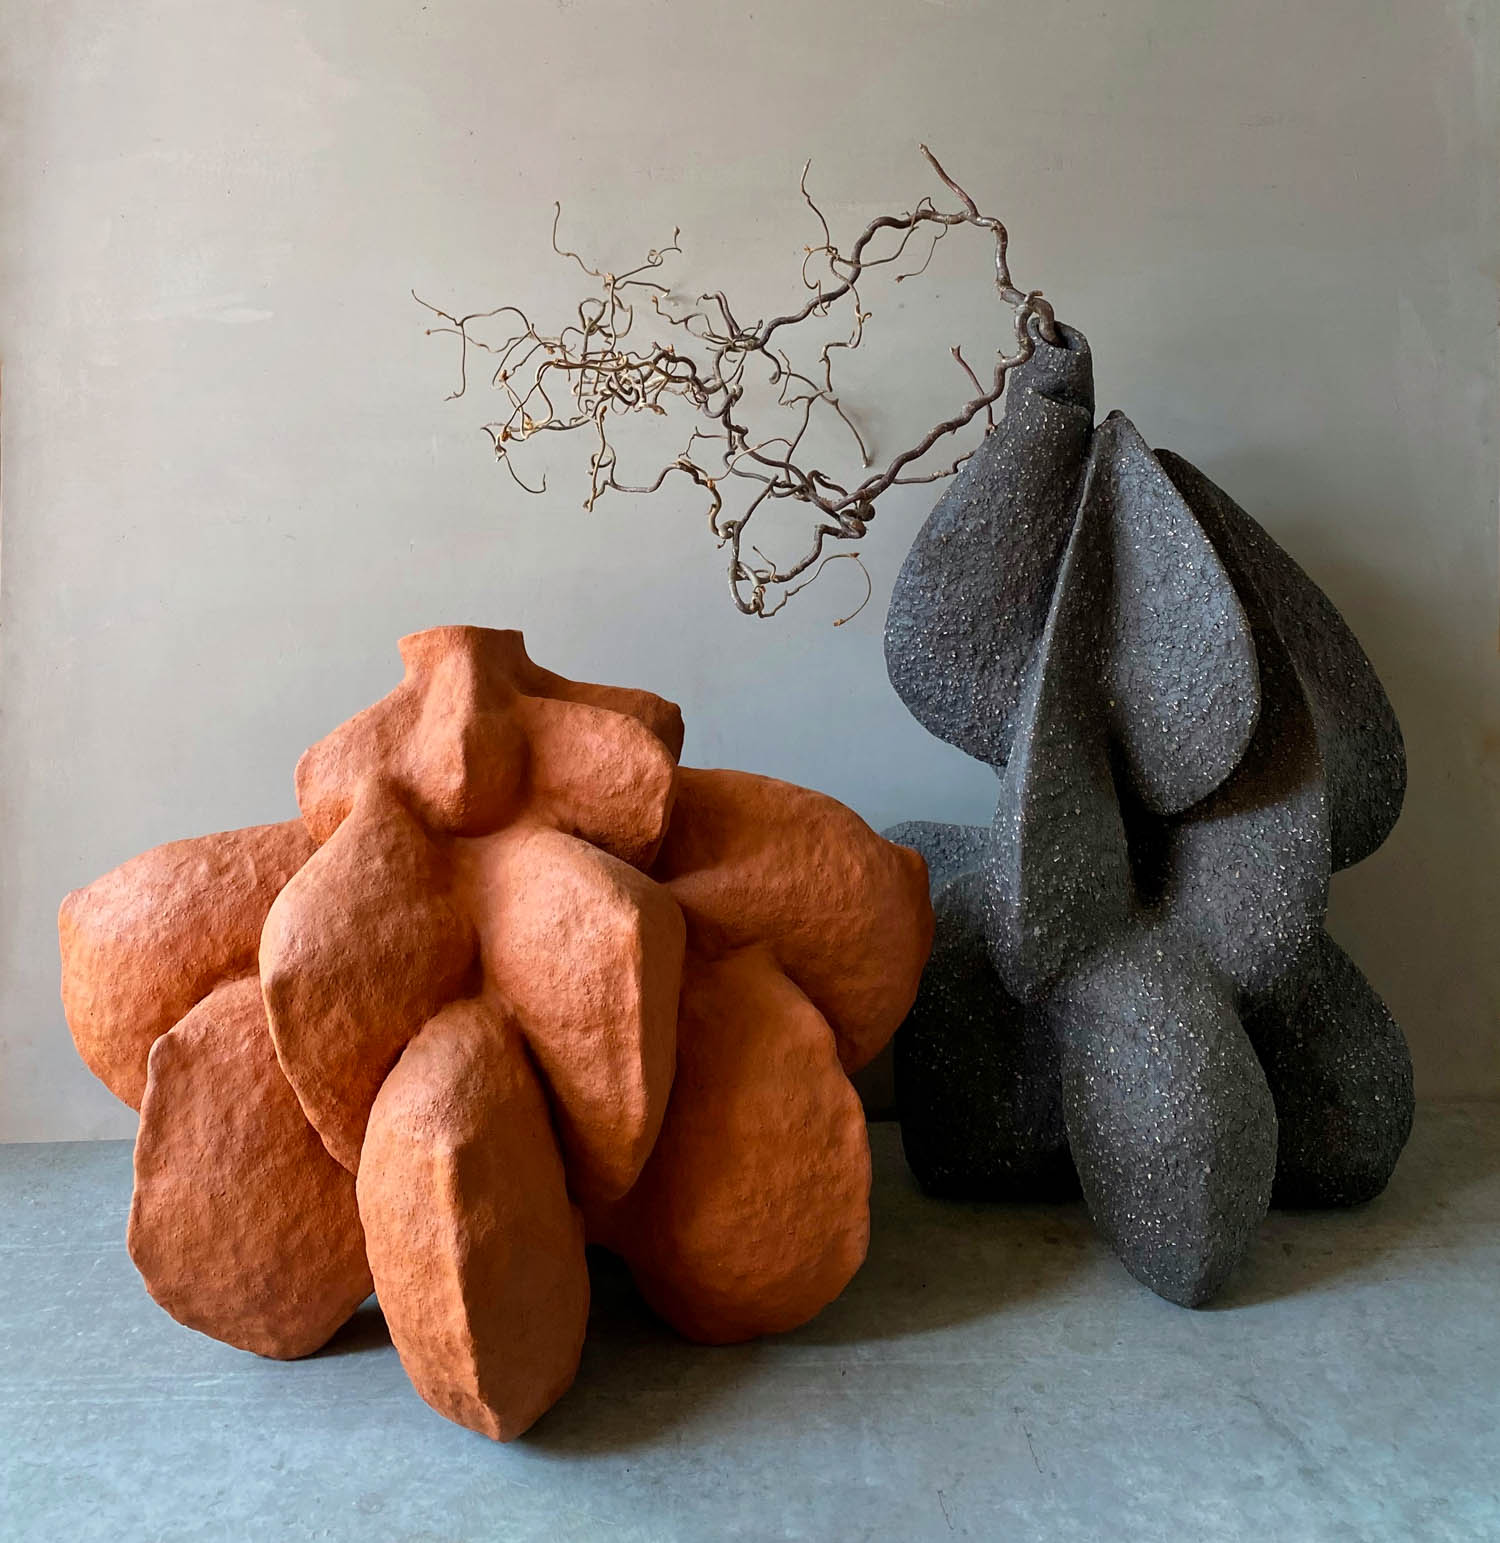 Biomorphic shapes in orange and gray.